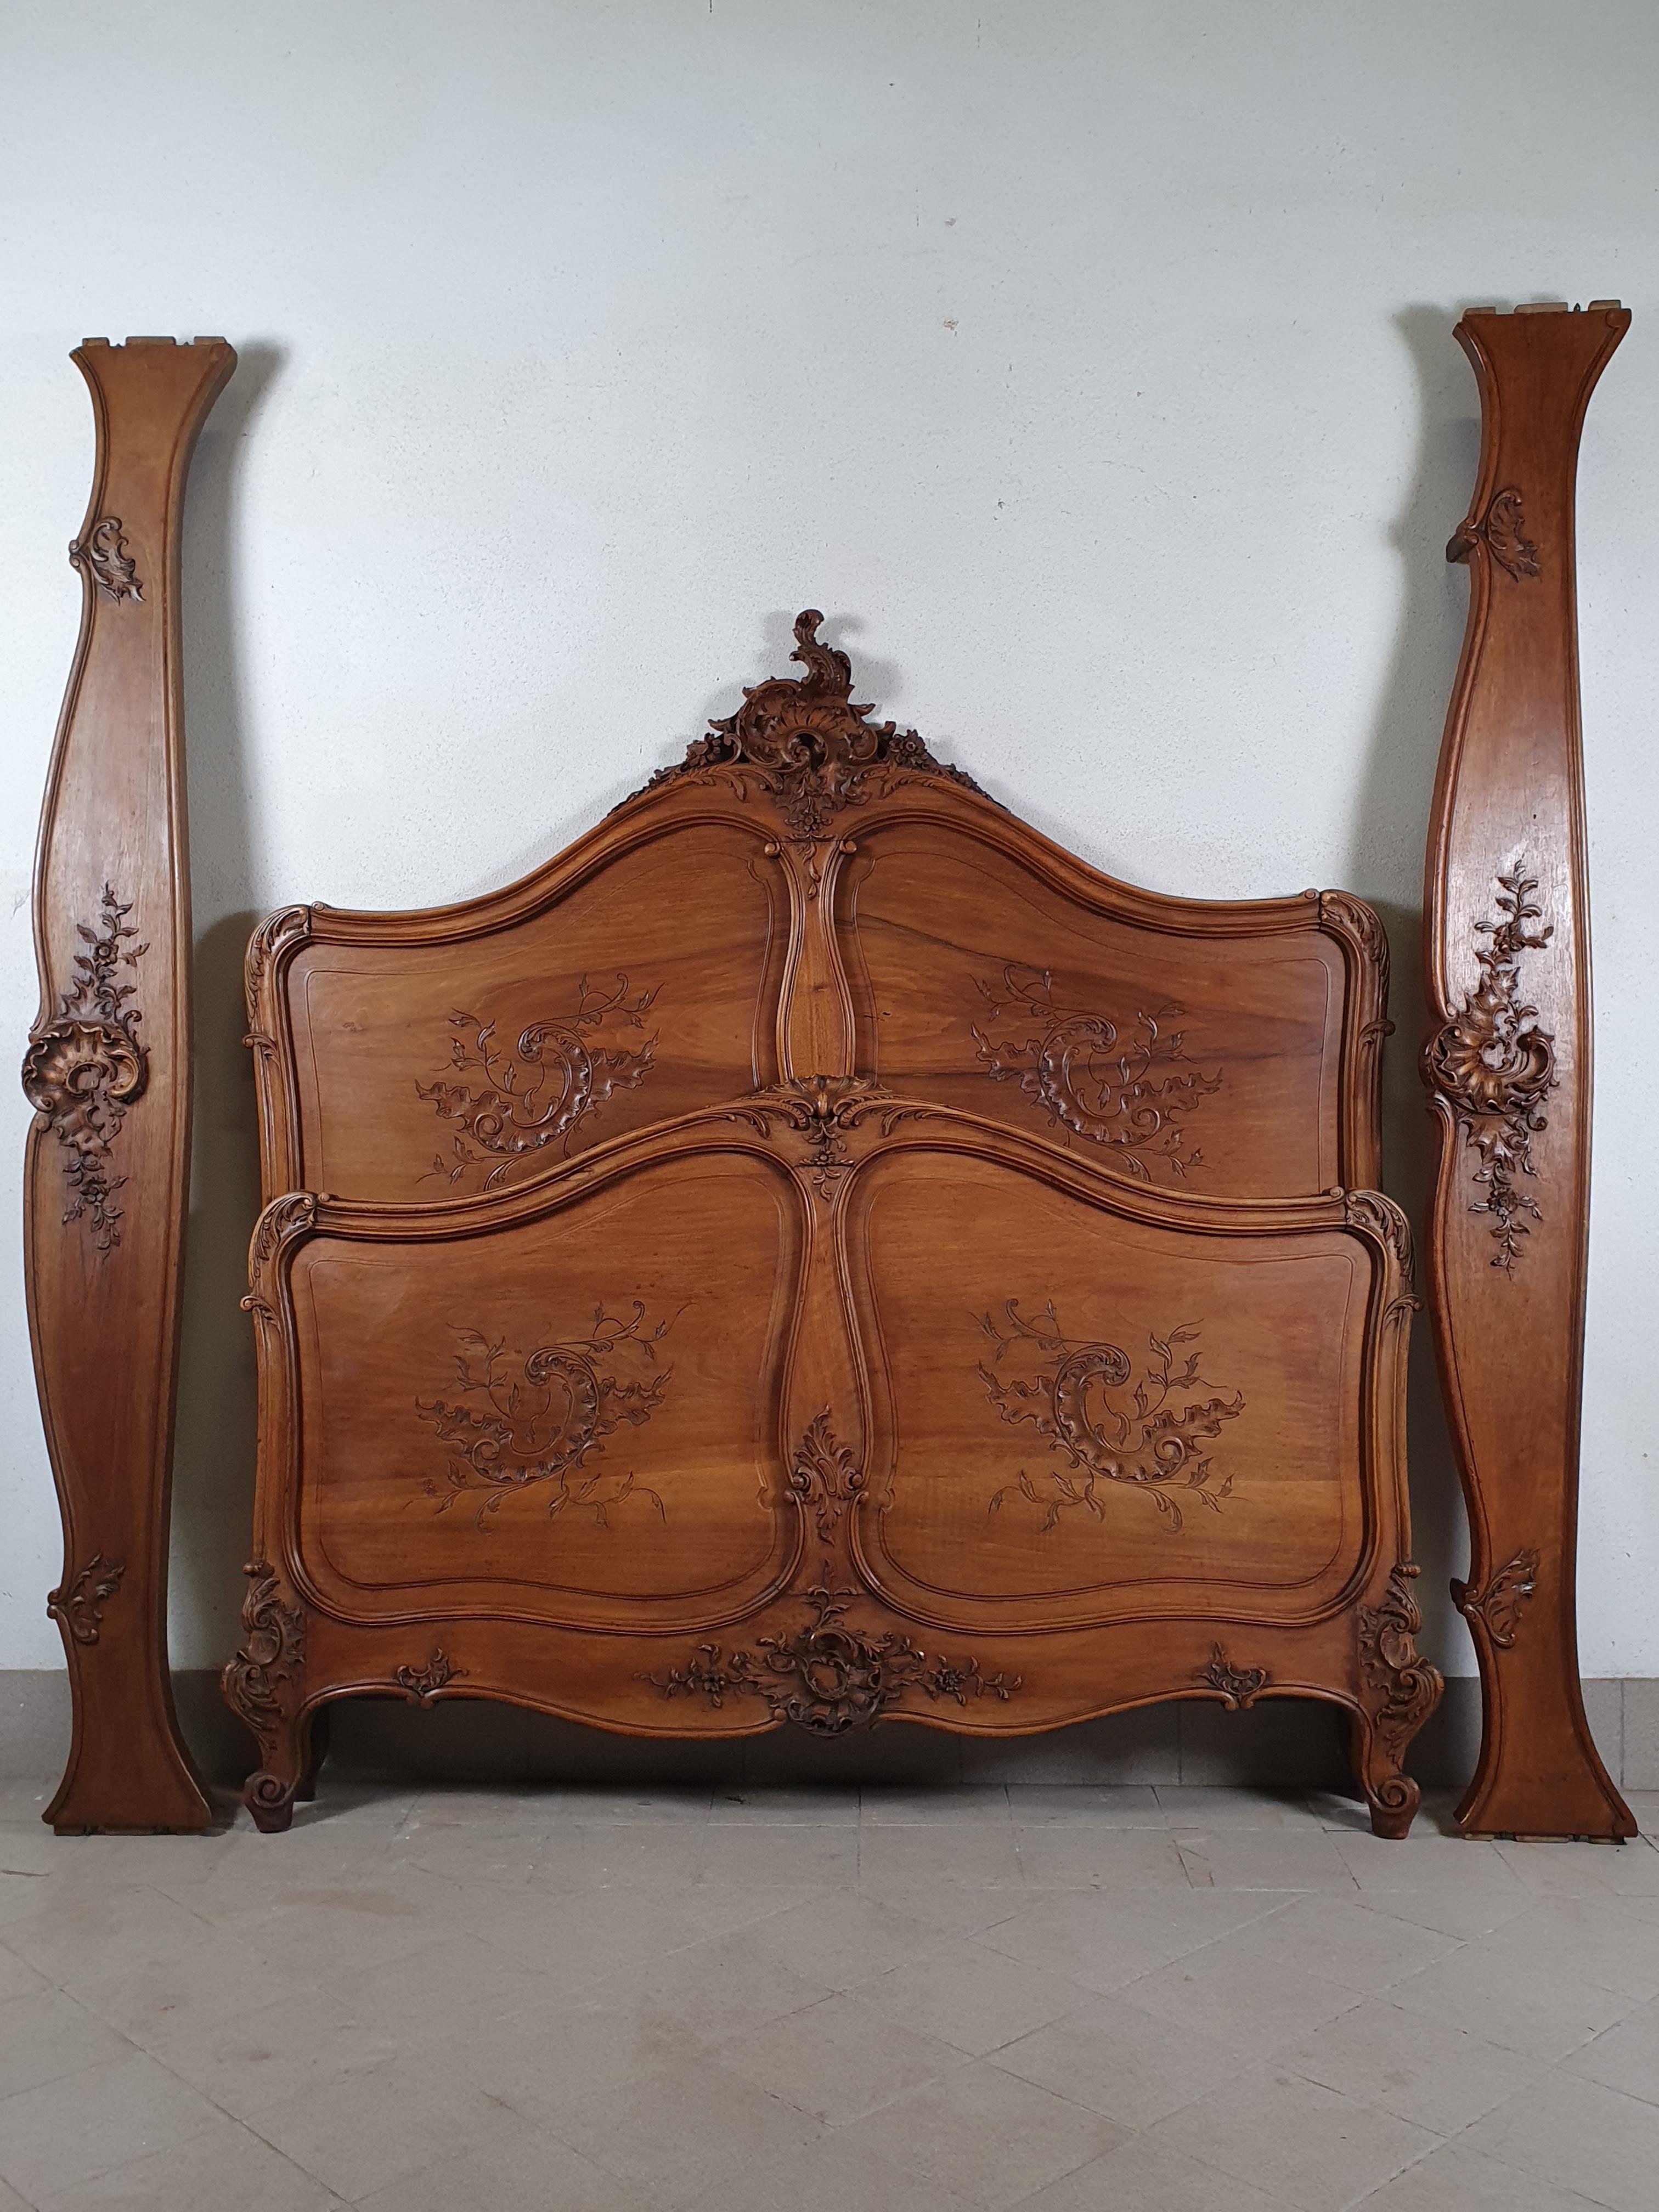 Important bedroom furniture made of solid walnut very richly carved with motifs inspired by Louis XV Rocaille.

Composed of :
. a three-door wardrobe with beveled glass, central projection, interior with compartments arranged with adjustable